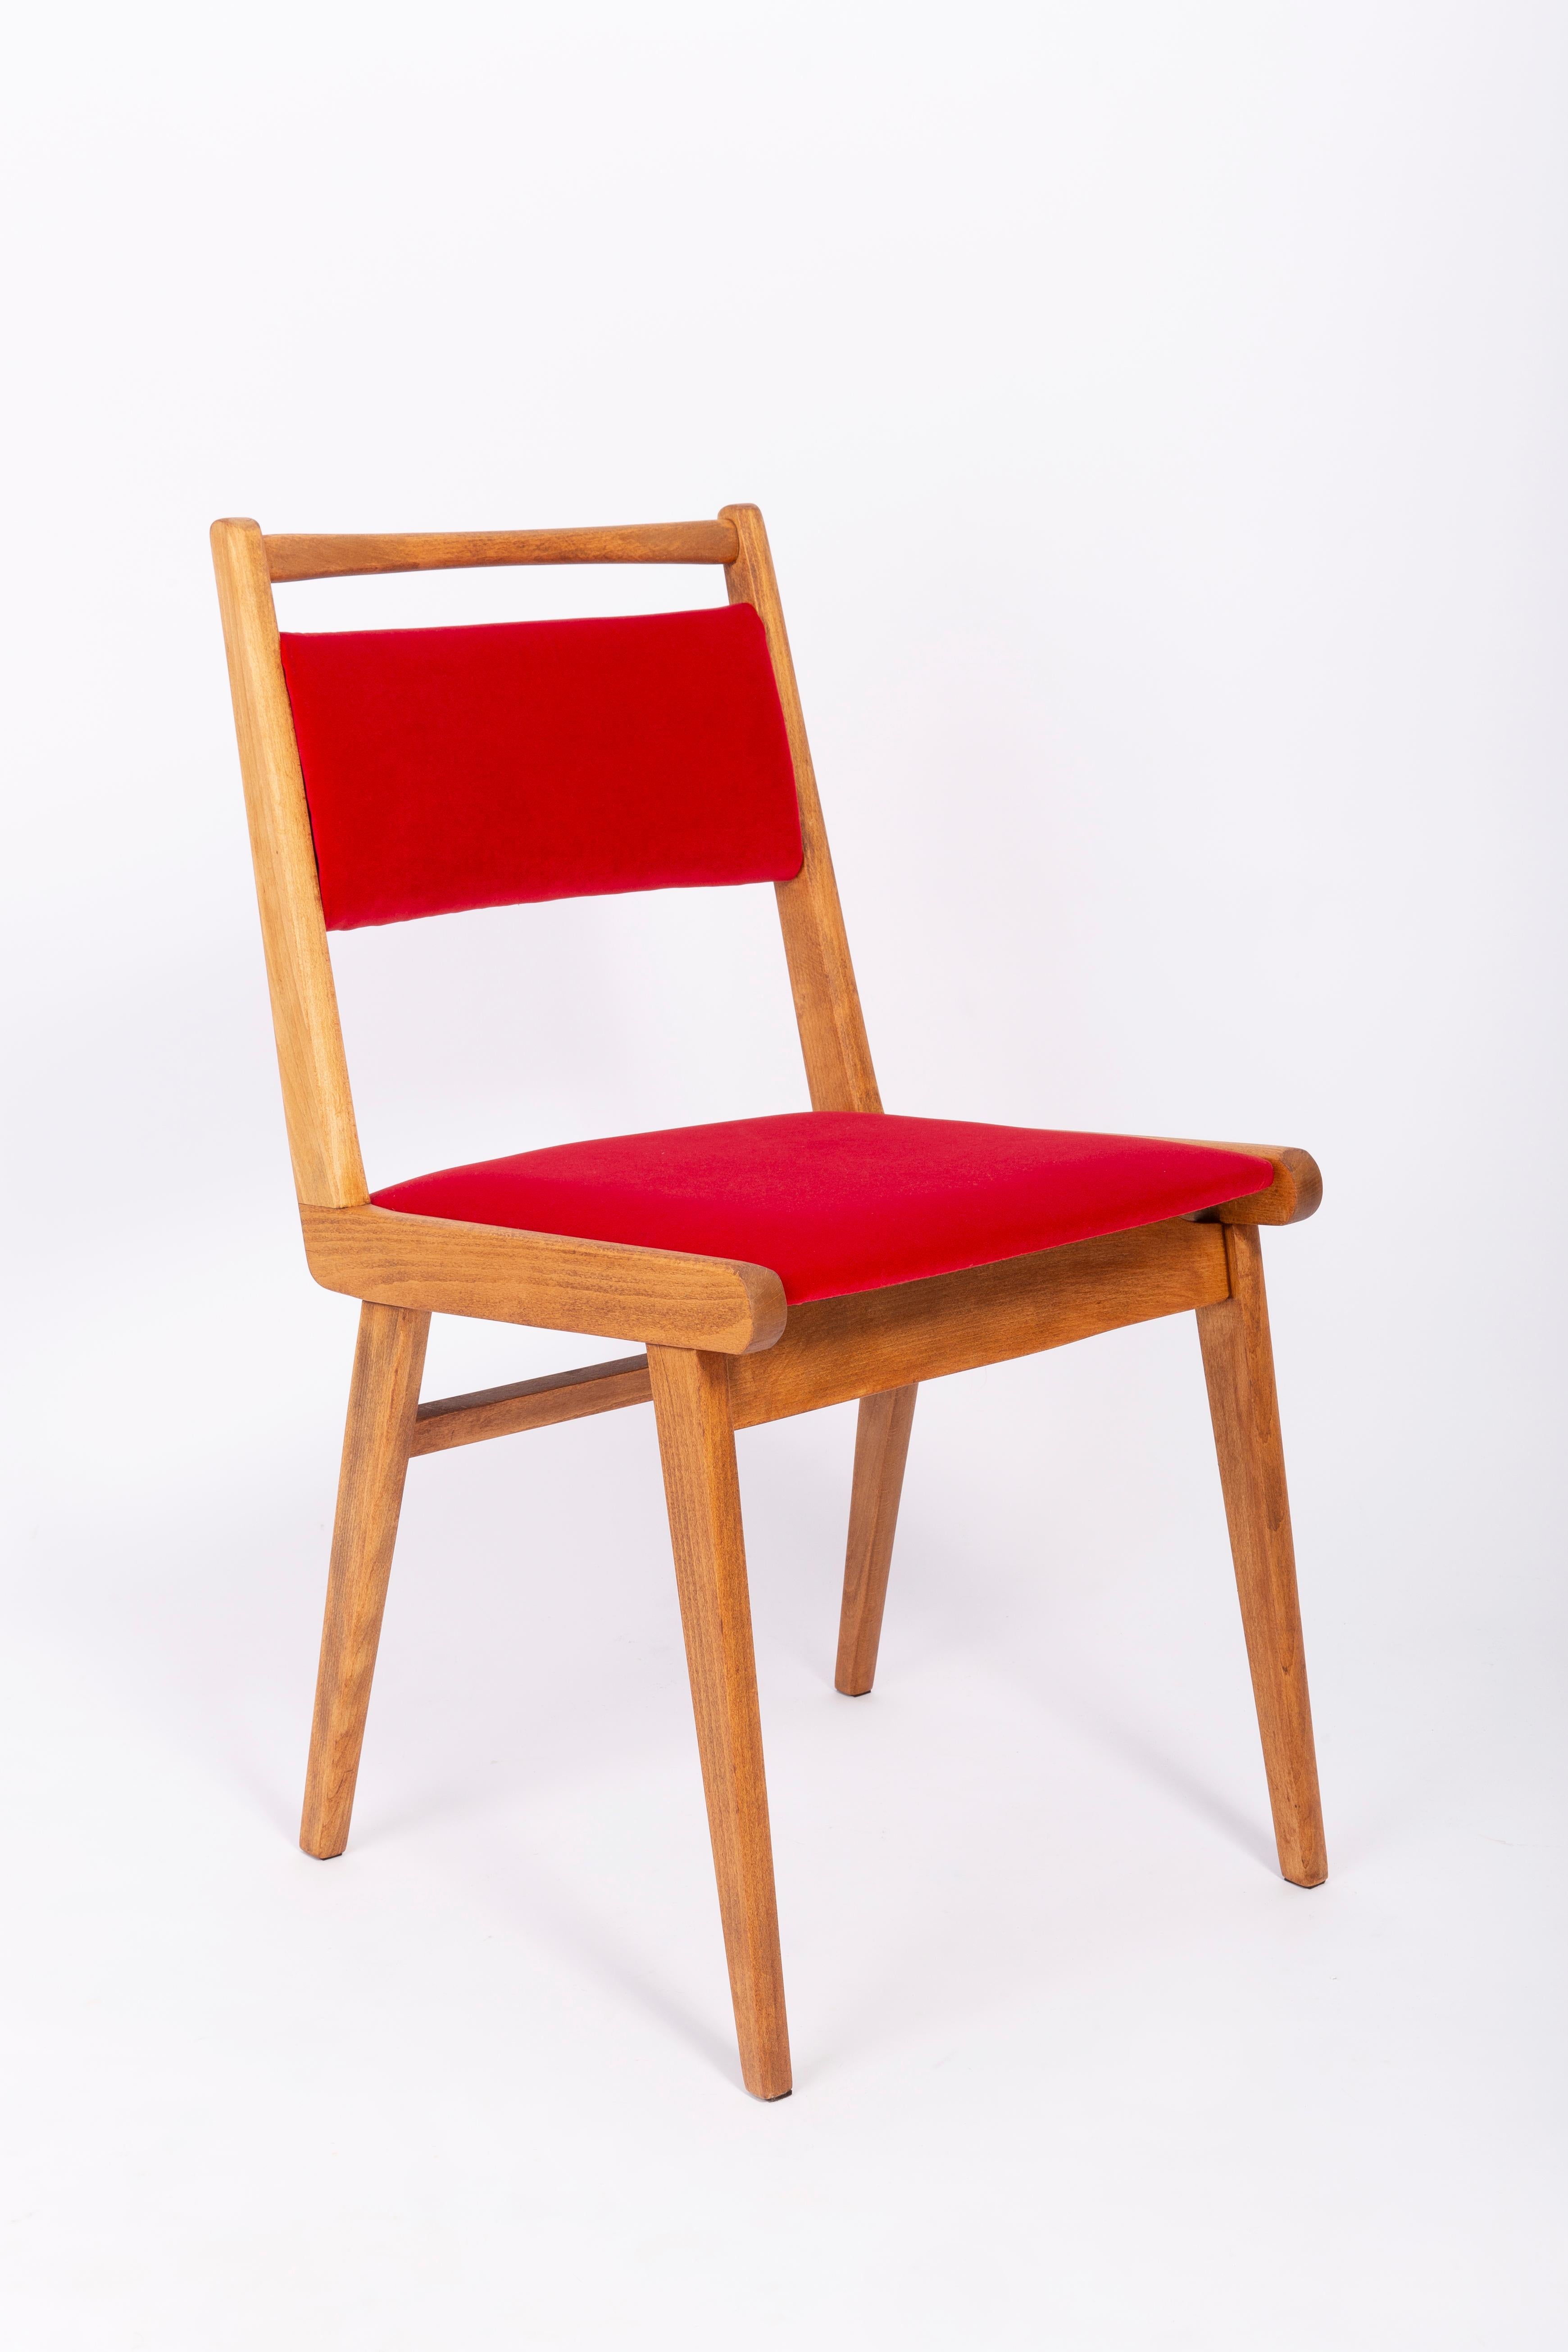 Set of Four 20th Century Black Blue White and Red Velvet Chairs, Poland, 1960s For Sale 2